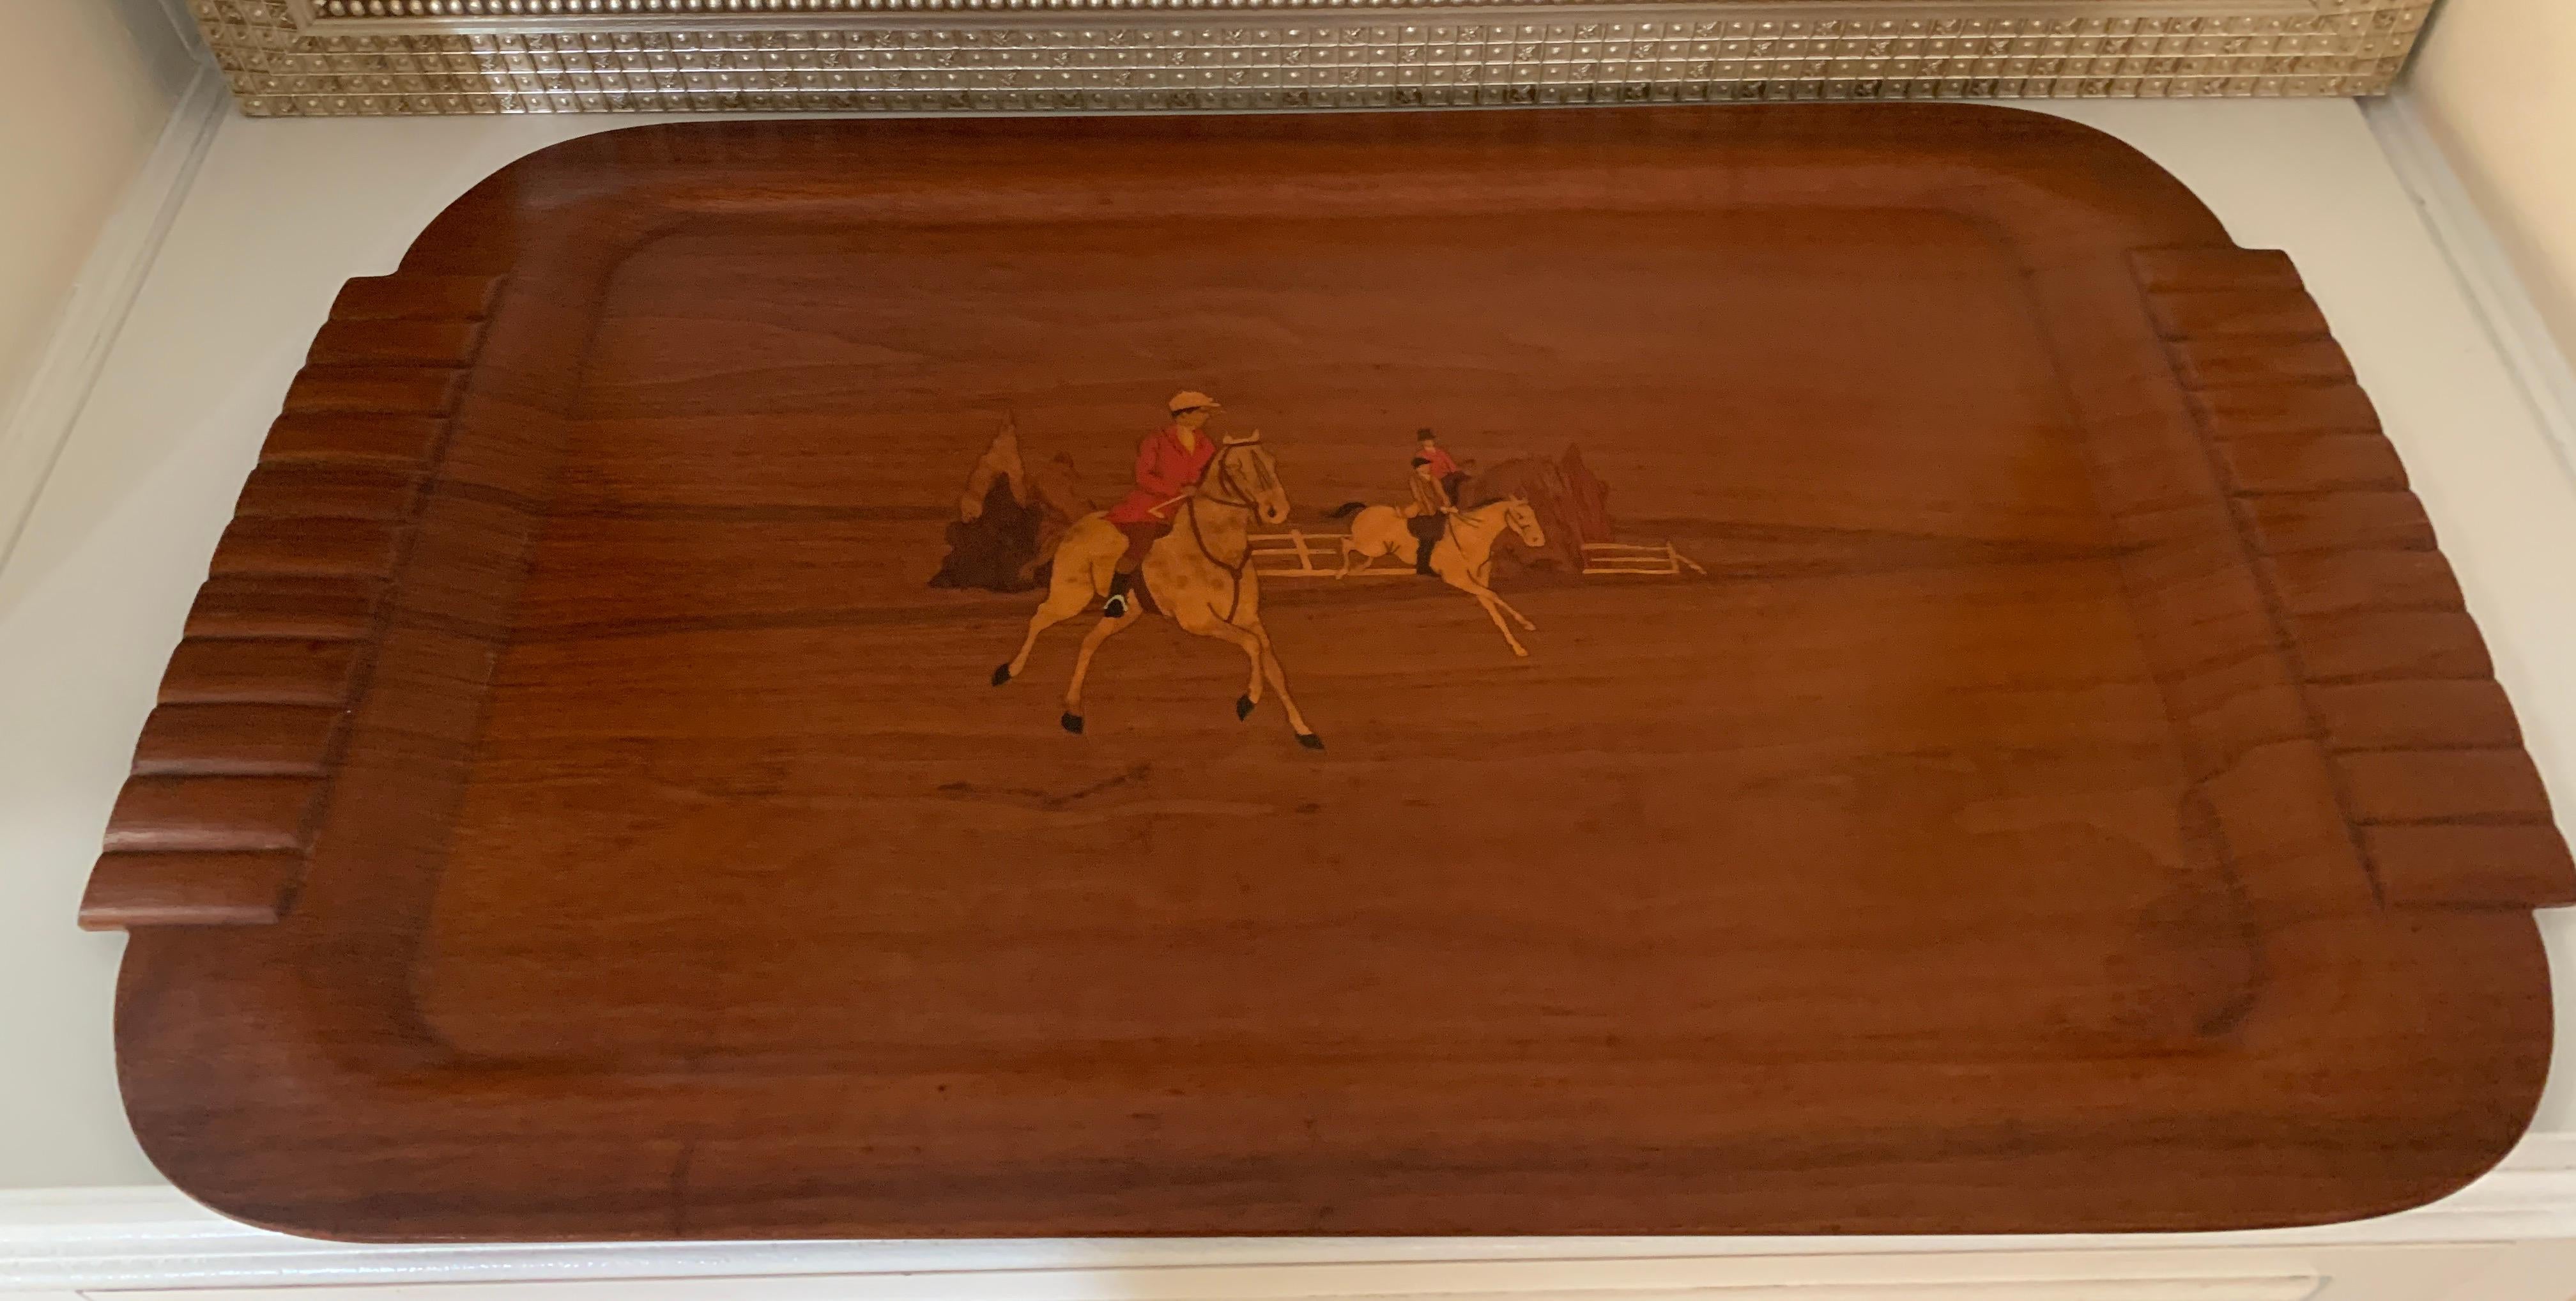 Mid-Century Modern Wooden Serving Tray with Horses in the Style of Ralph Lauren, Circa 1940